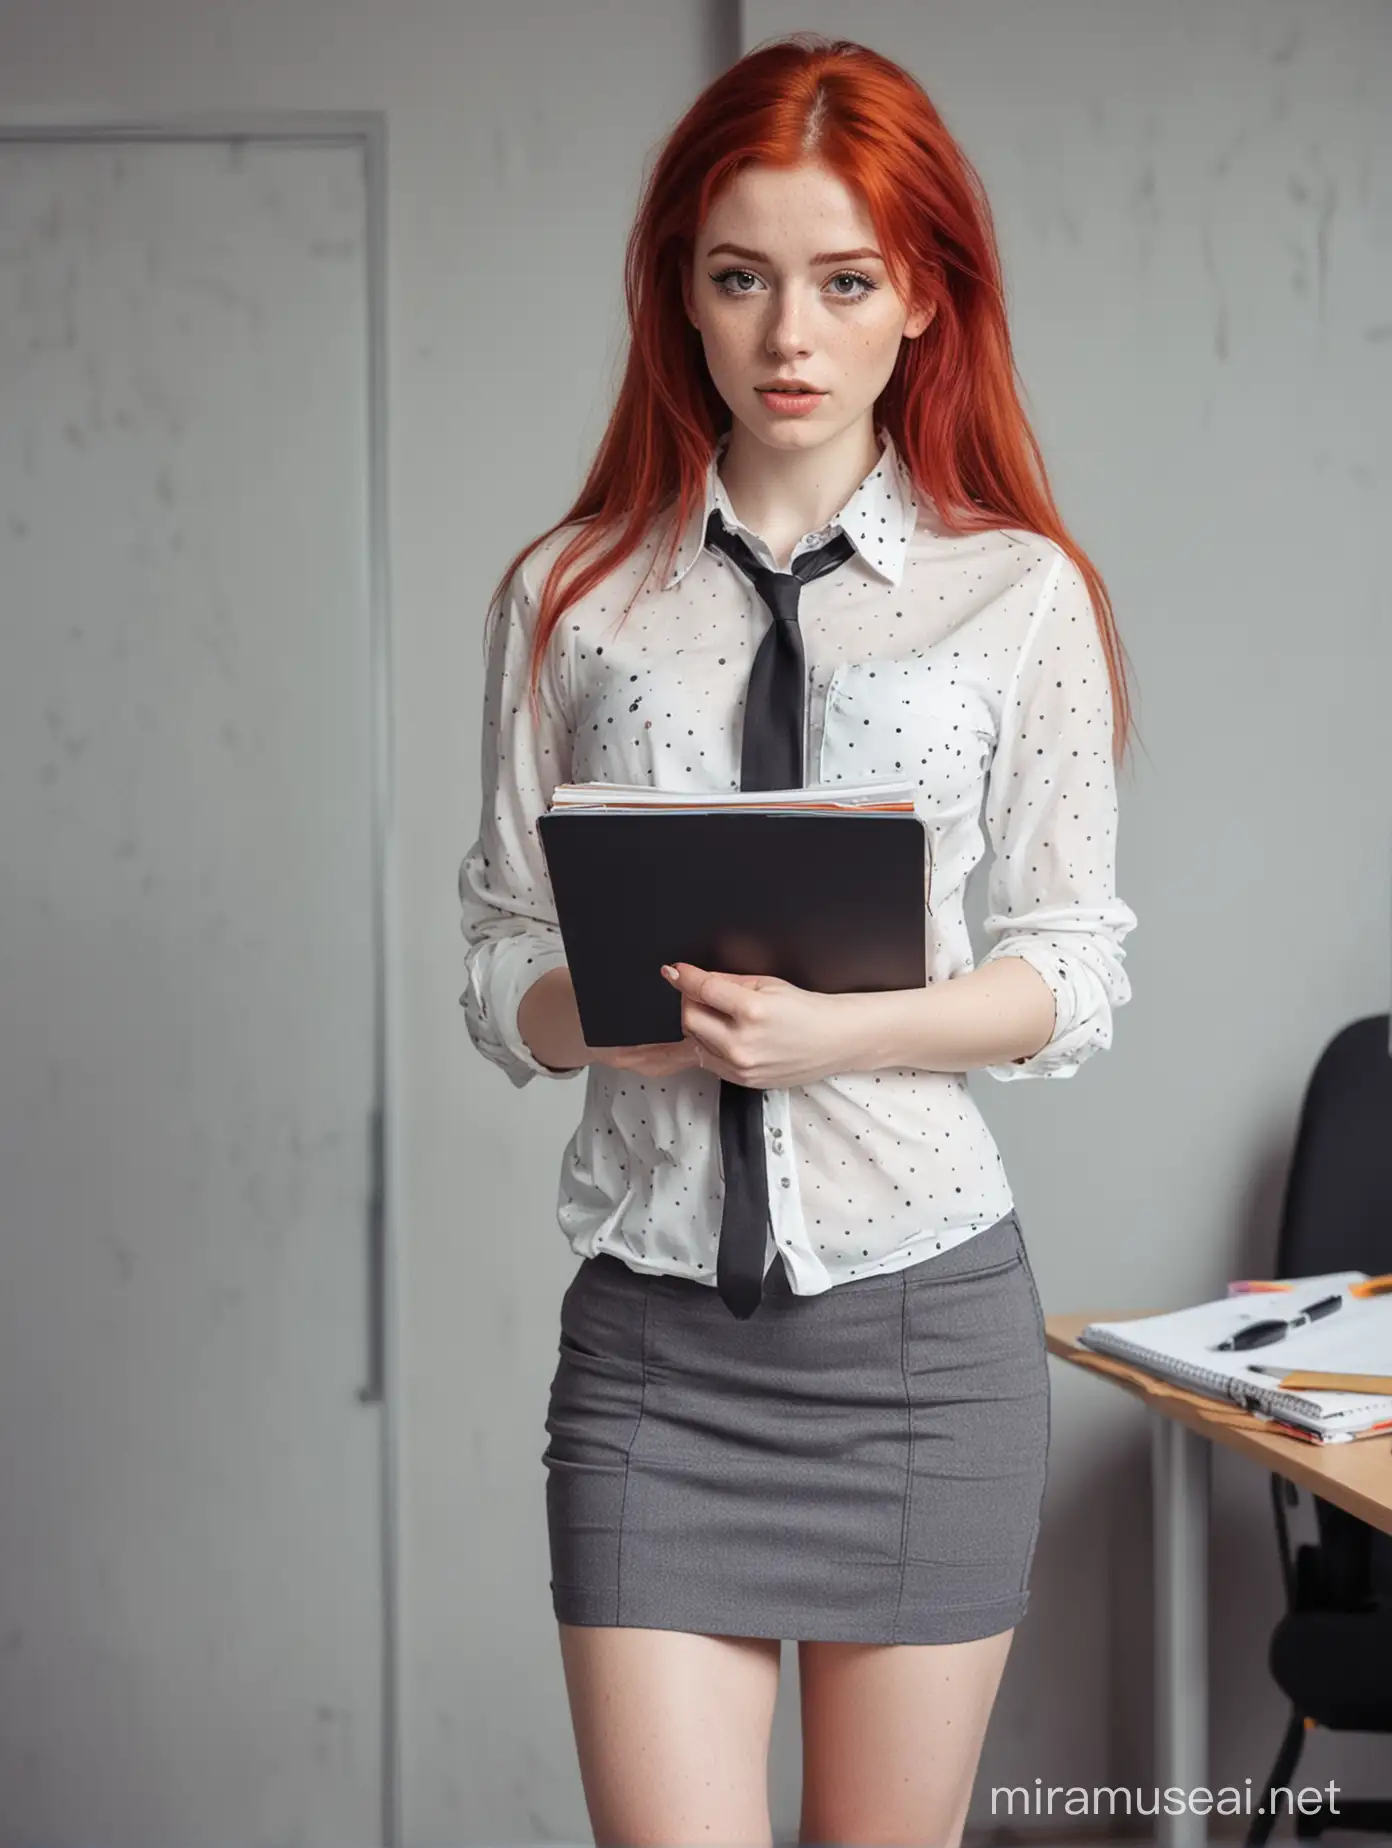 Bold Redhead Office Worker with Freckles Holding Notebook